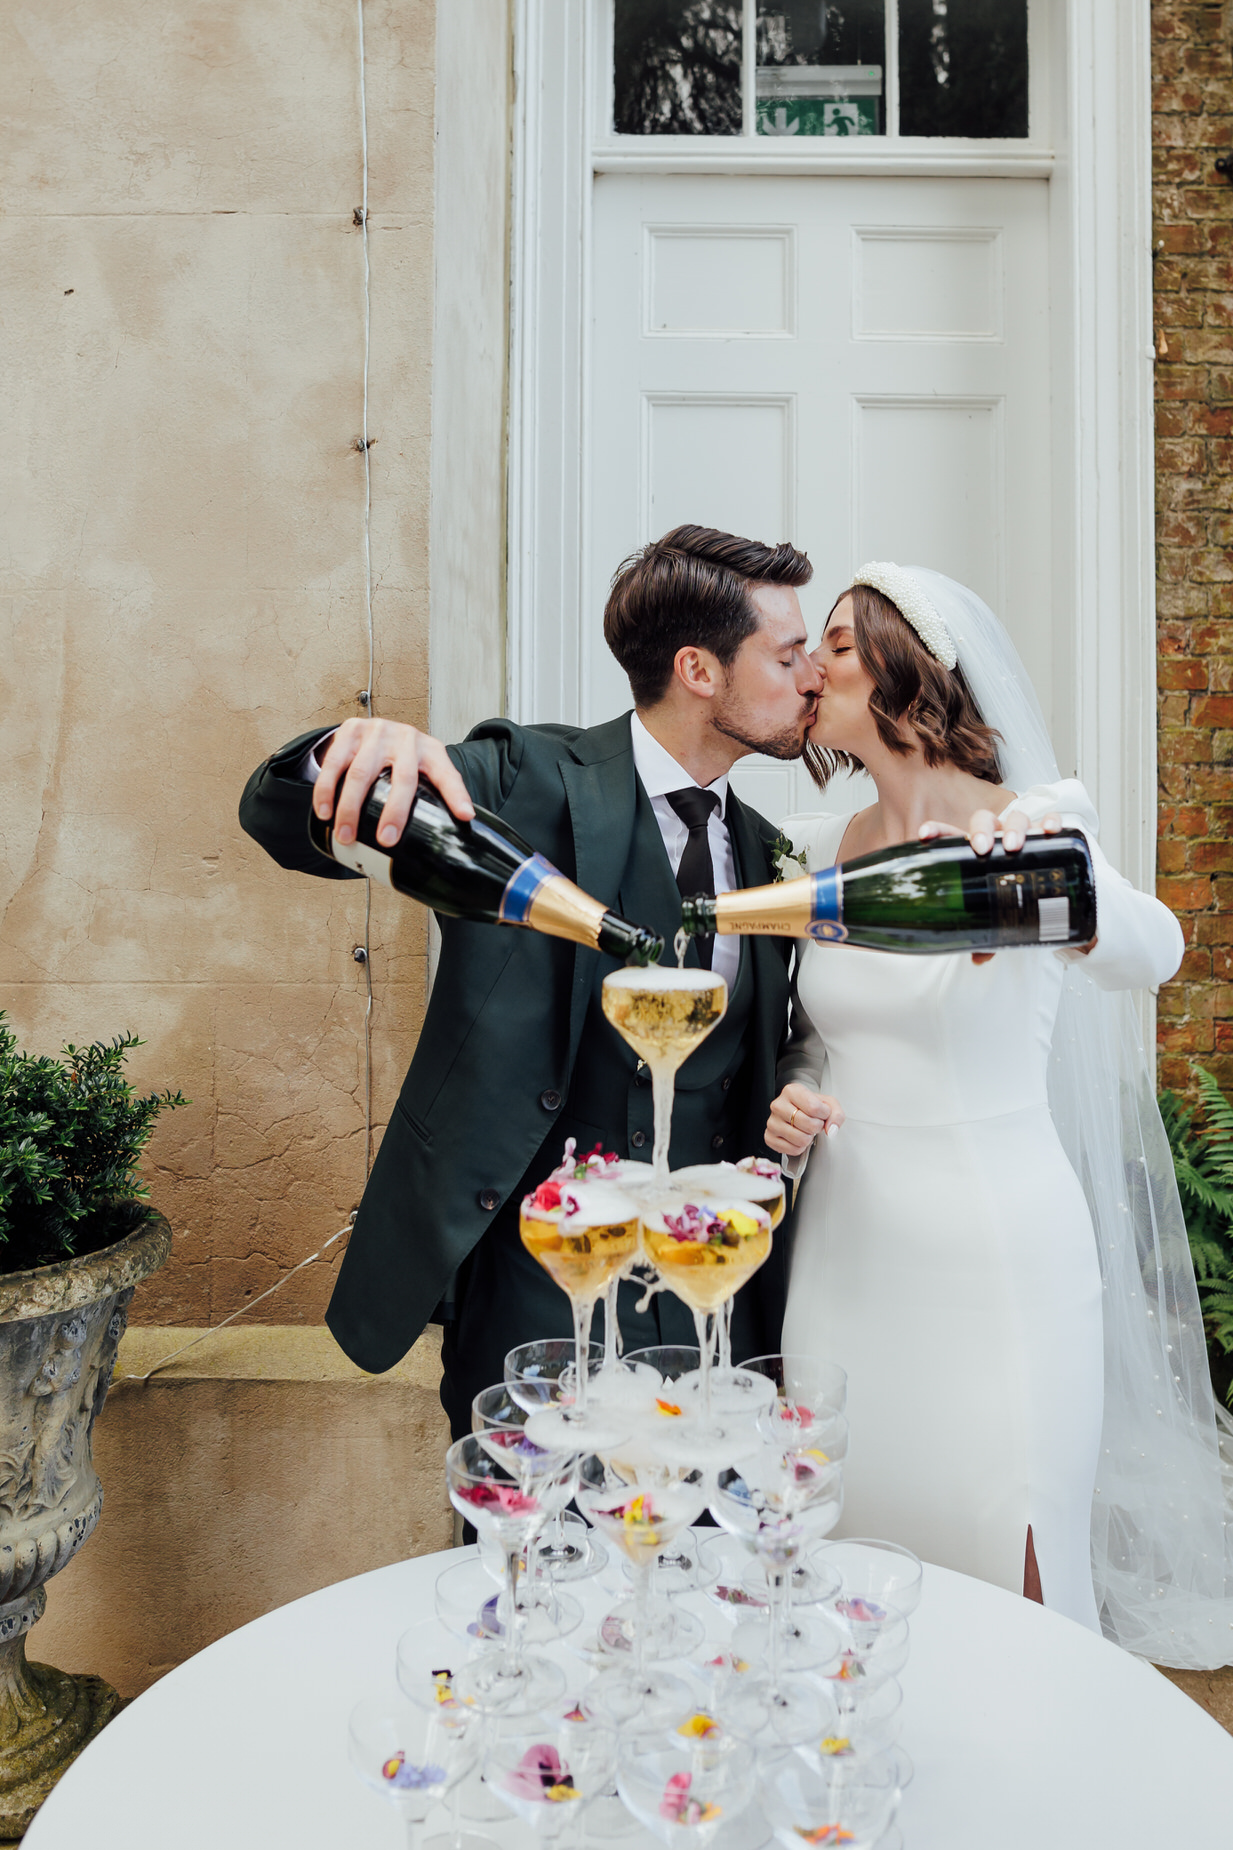 champagne tower, authentic wedding photography, Aswarby Rectory Wedding, michelle wood photographer